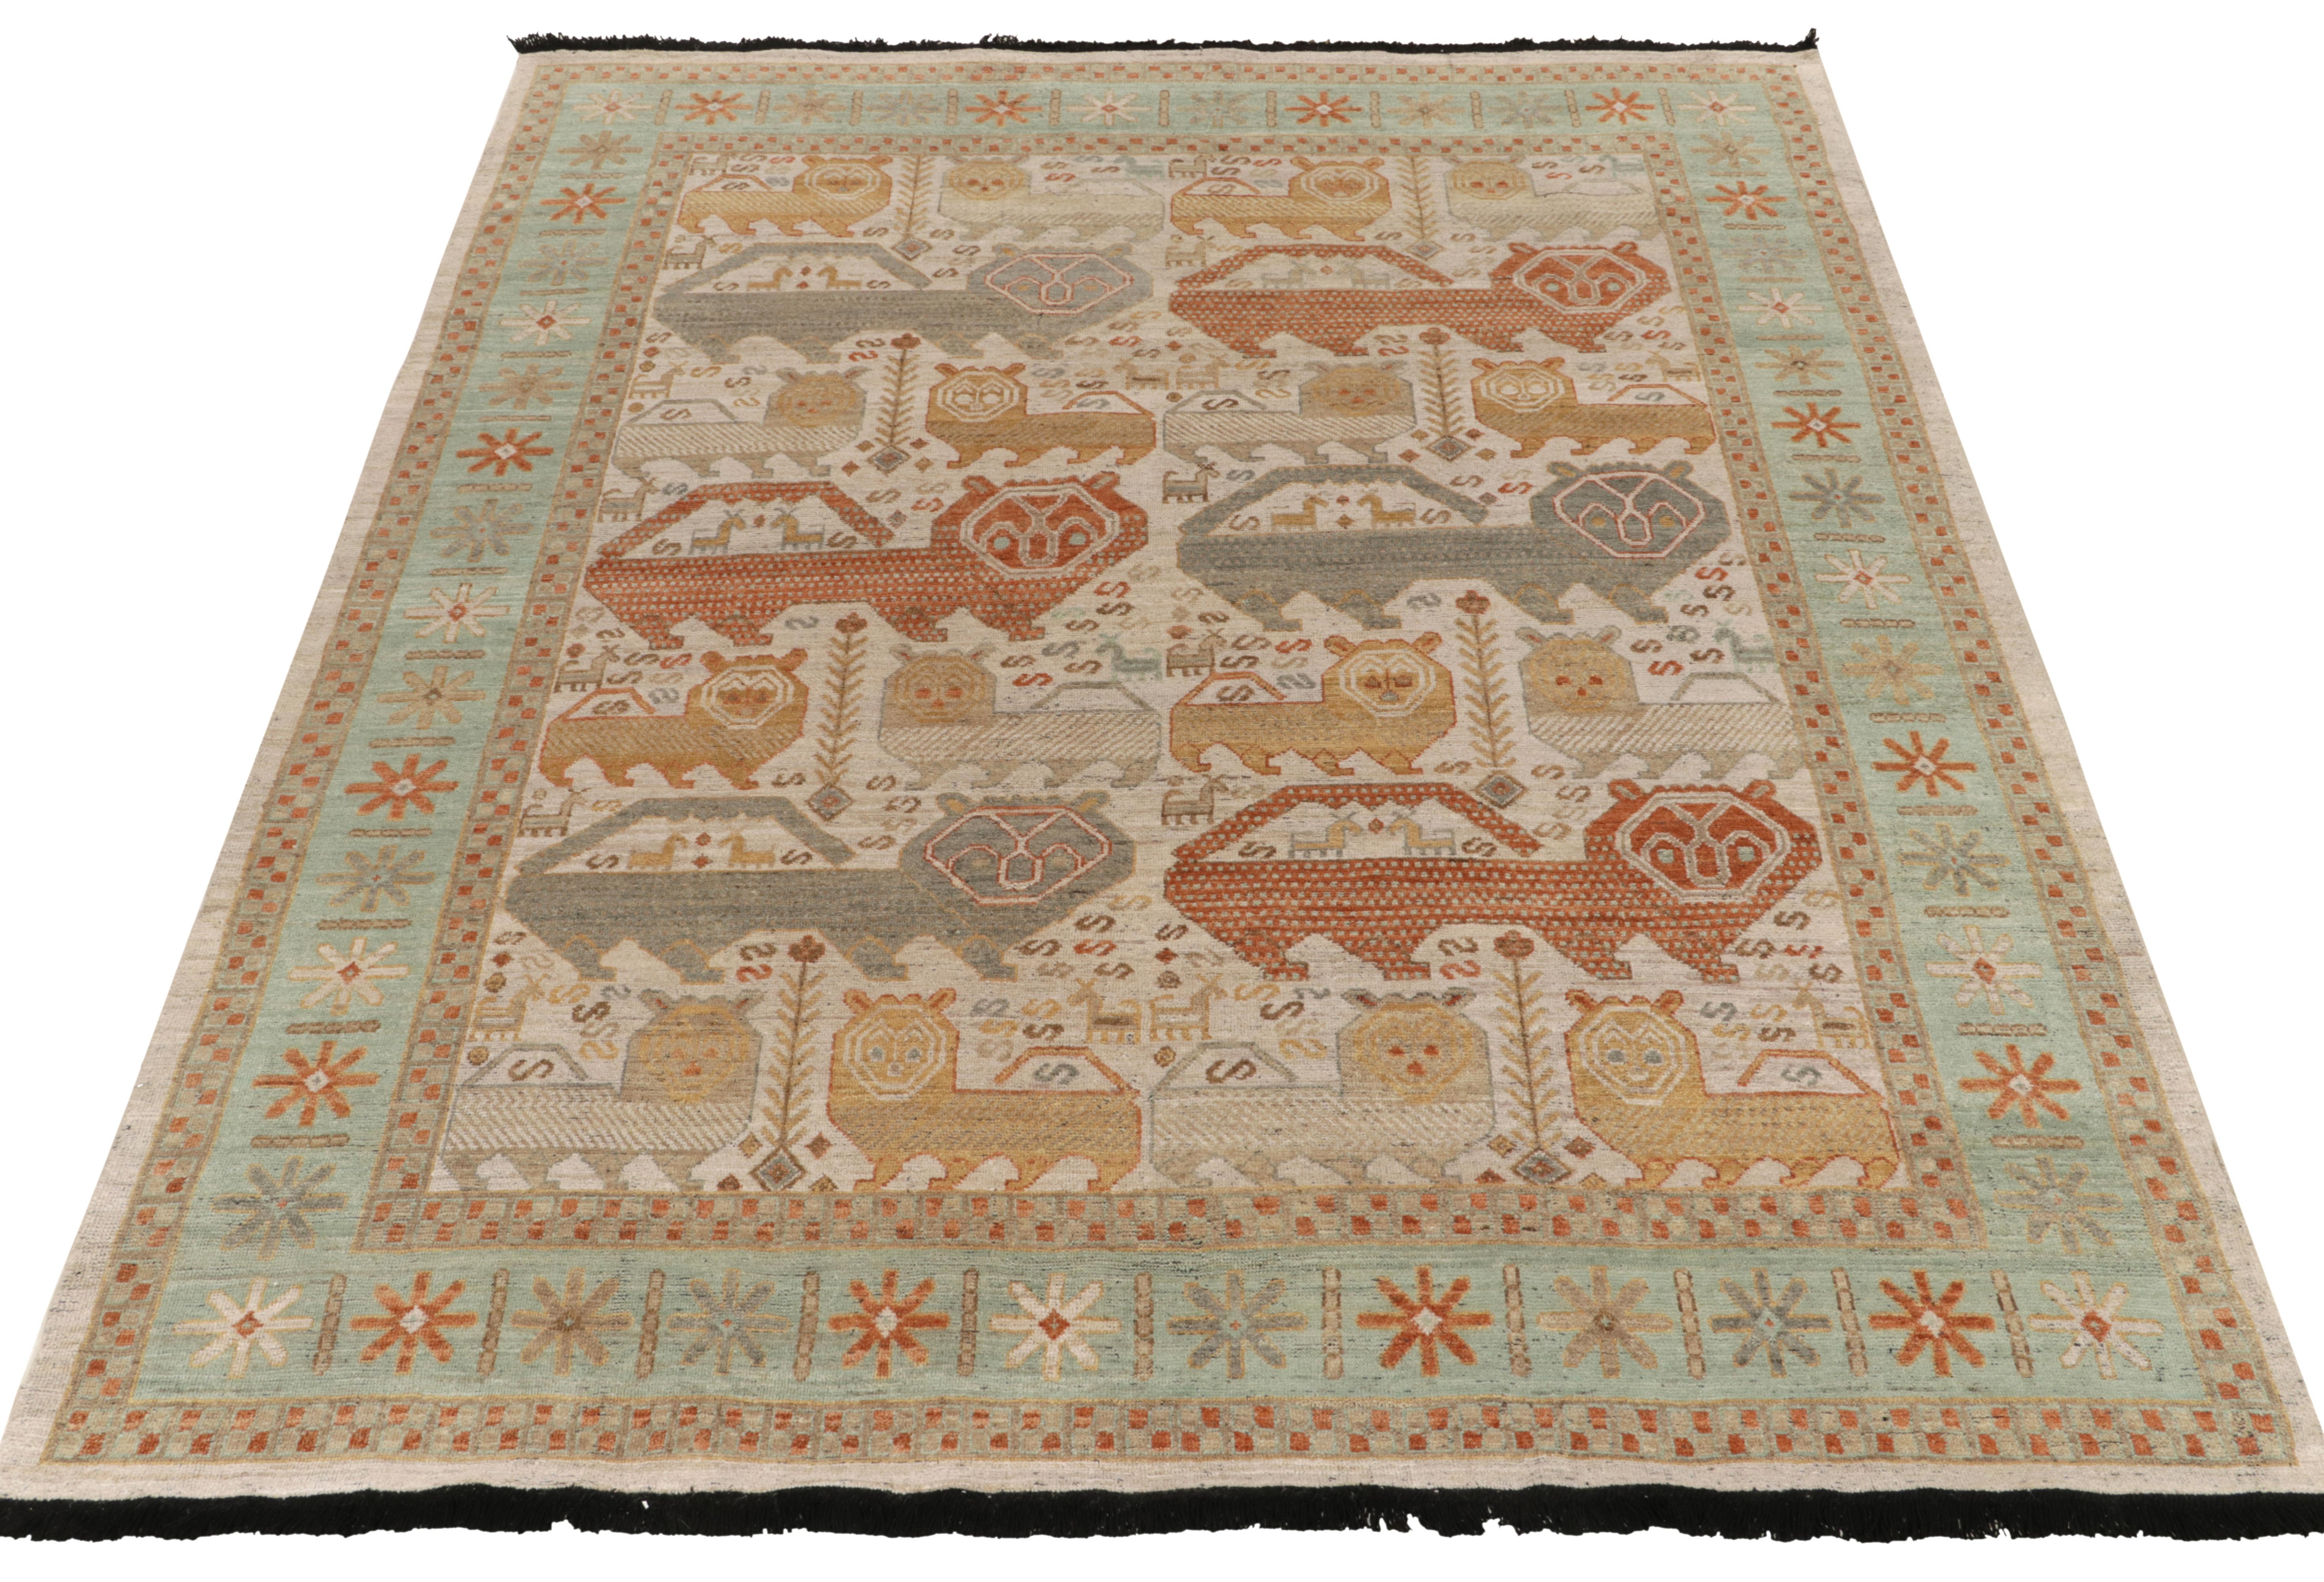 Hand-knotted in wool, an 8x10 ode to classic 18th century Caucasian rug aesthetics—from Rug & Kilim’s extensive Burano Collection. 

The carpet draws on tribal lion pictorials in muted orange, slate gray, light turquoise green & gold atop crisp